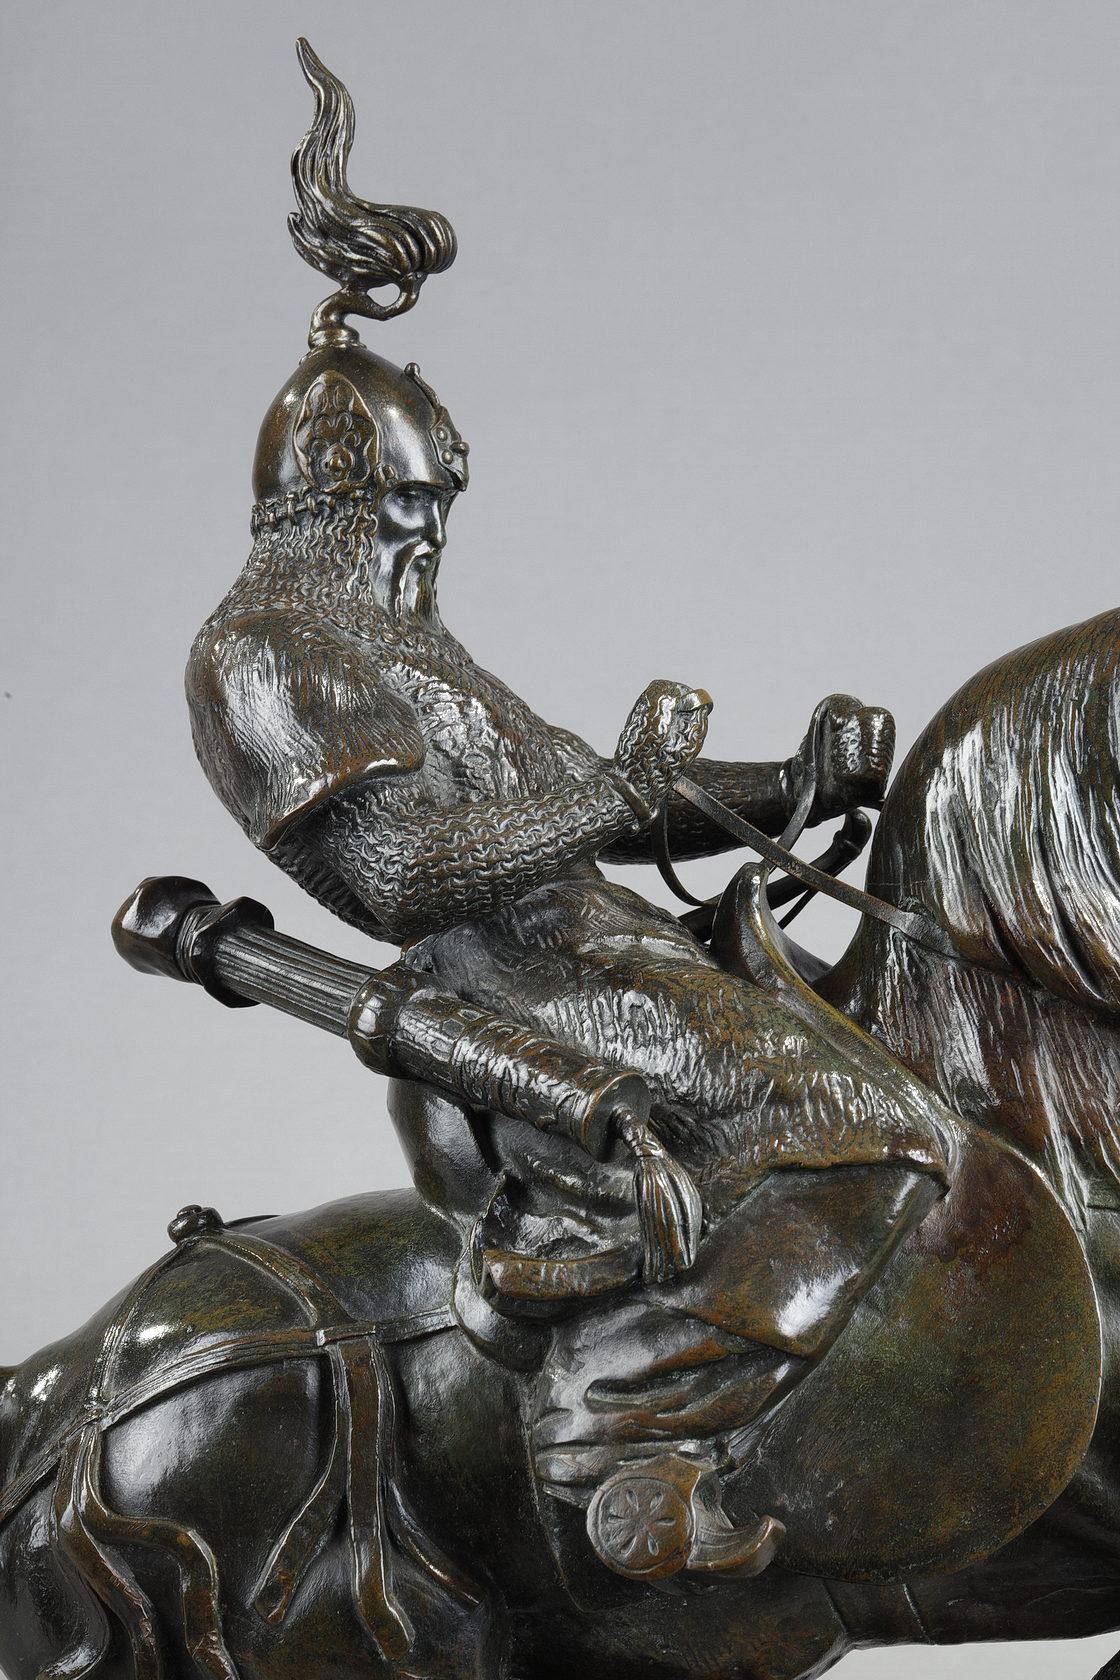 A very fine bronze equestrian sculpture with a nuanced dark greenish brown patina

France
model of 1845
Cast by Ferdinand Barbedienne around 1890-1900

height 37,3 cm
length of the base 31,5 cm
Marked with a souvenir date 